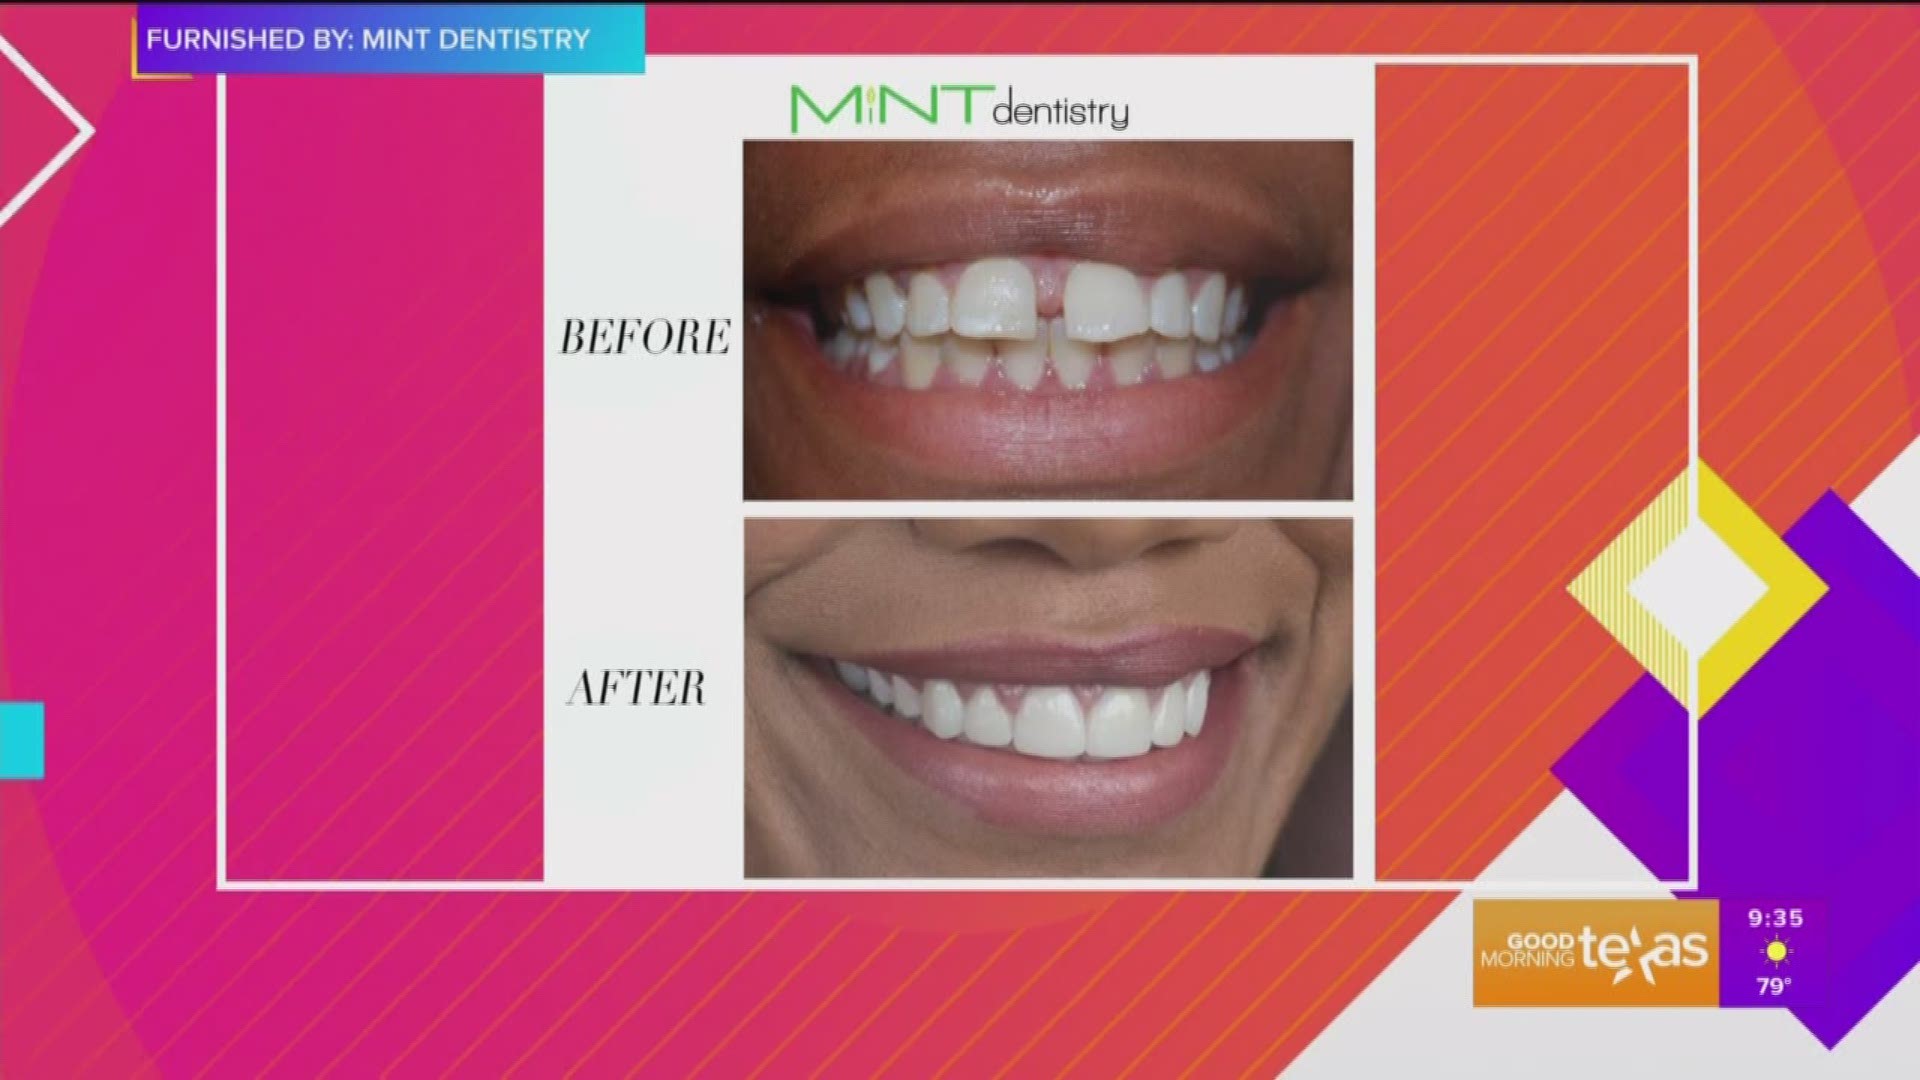 Call (214) 821-MINT or (214) 821-6468 for more information or go to www.mintdentistry.com.